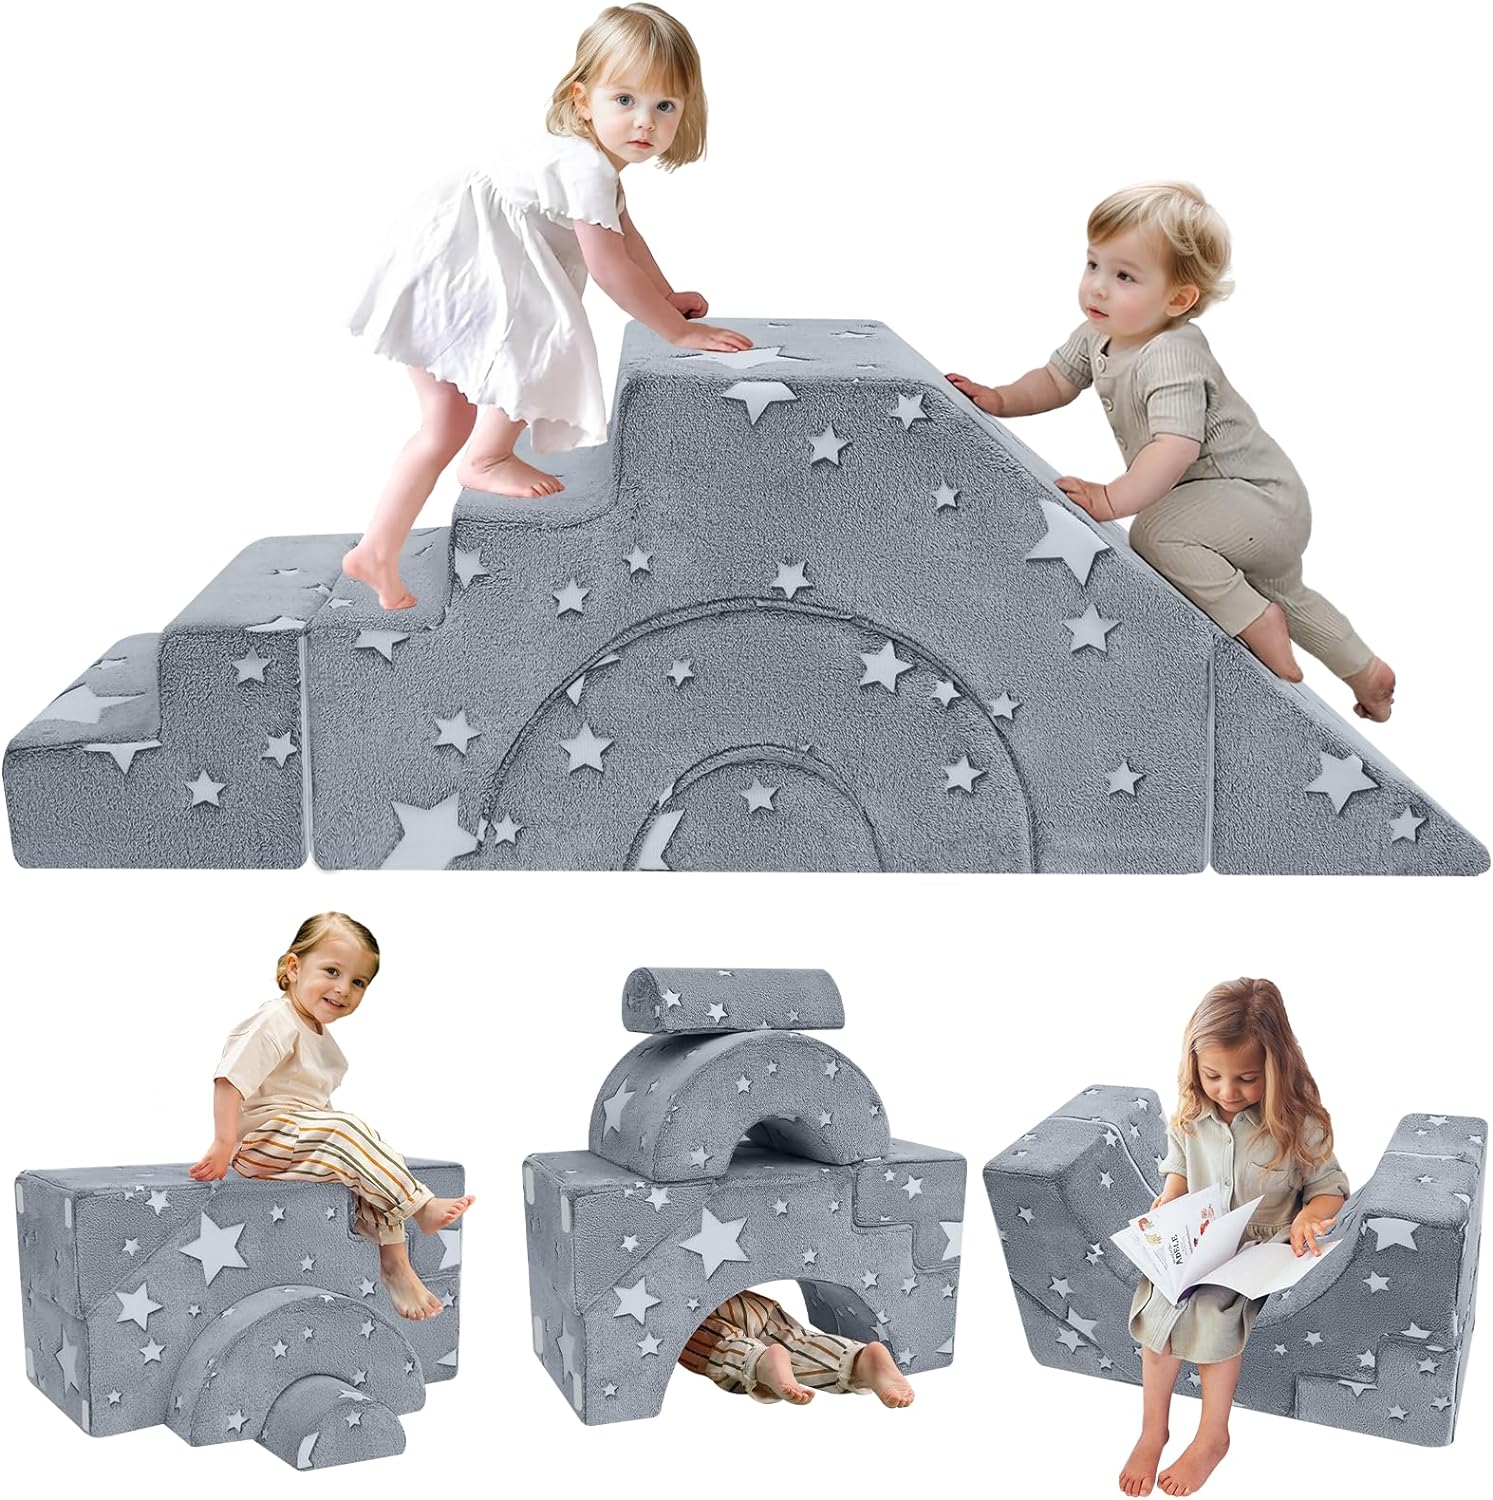 MeMoreCool Foam Climbing Toddler Couch Modular Kids Sofa, Sectional Baby Couch for Climb Crawl, Kid Play Couch Convertible Children Sofa Bedroom Playroom Furniture, Glow Sofa with Slide & Stair